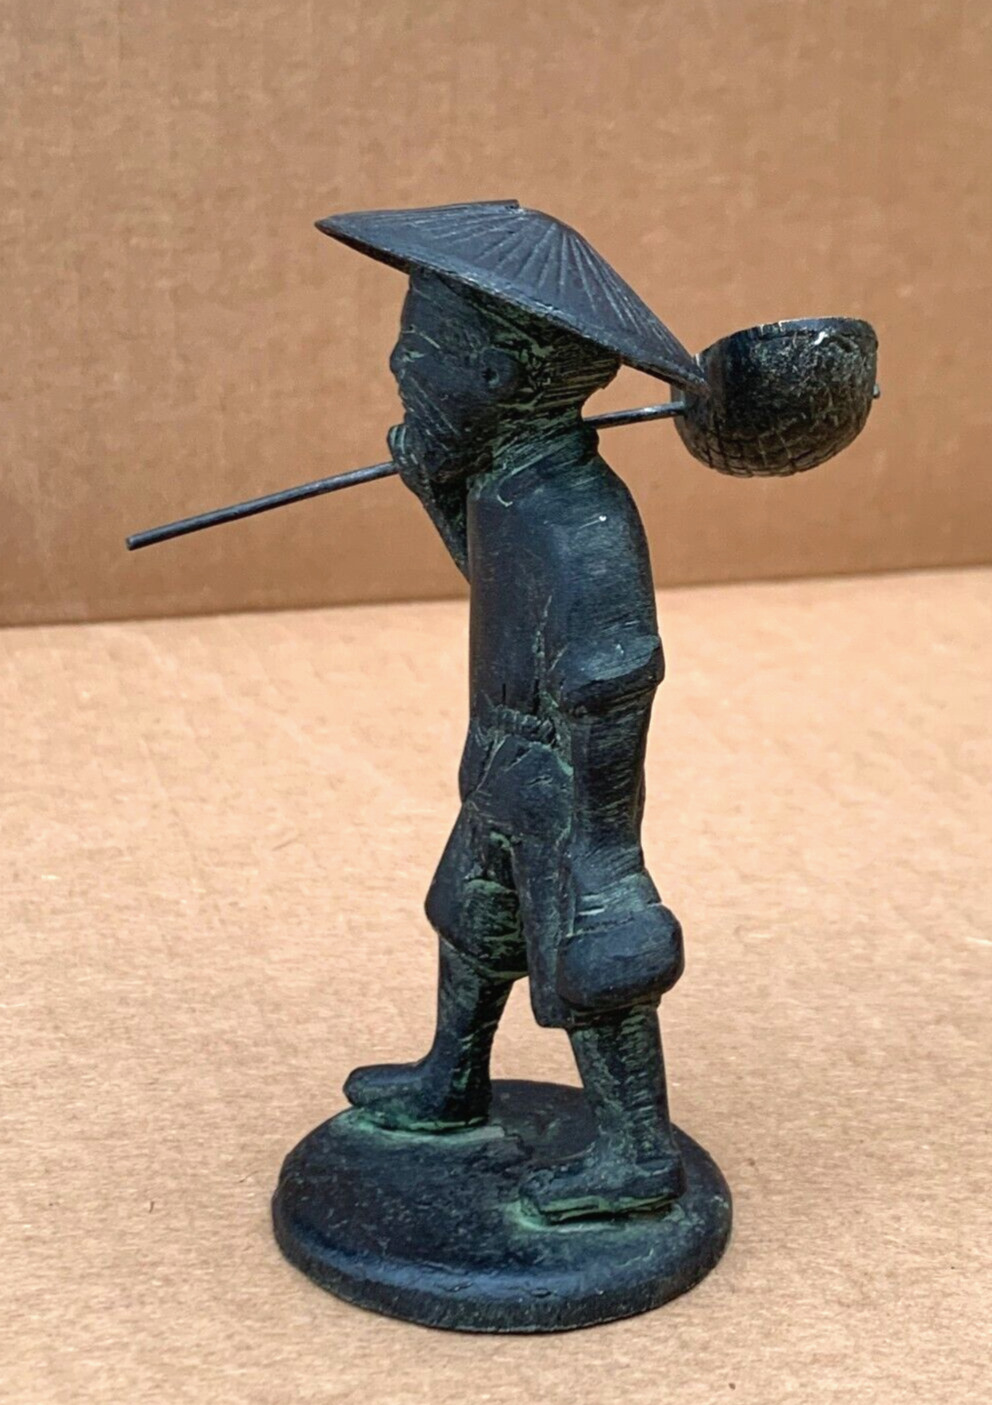 SMALL OLD ANTIQUE ASIAN BRONZE FIGURINE JAPANESE CHINESE VILLAGE MAN WITH BASKET